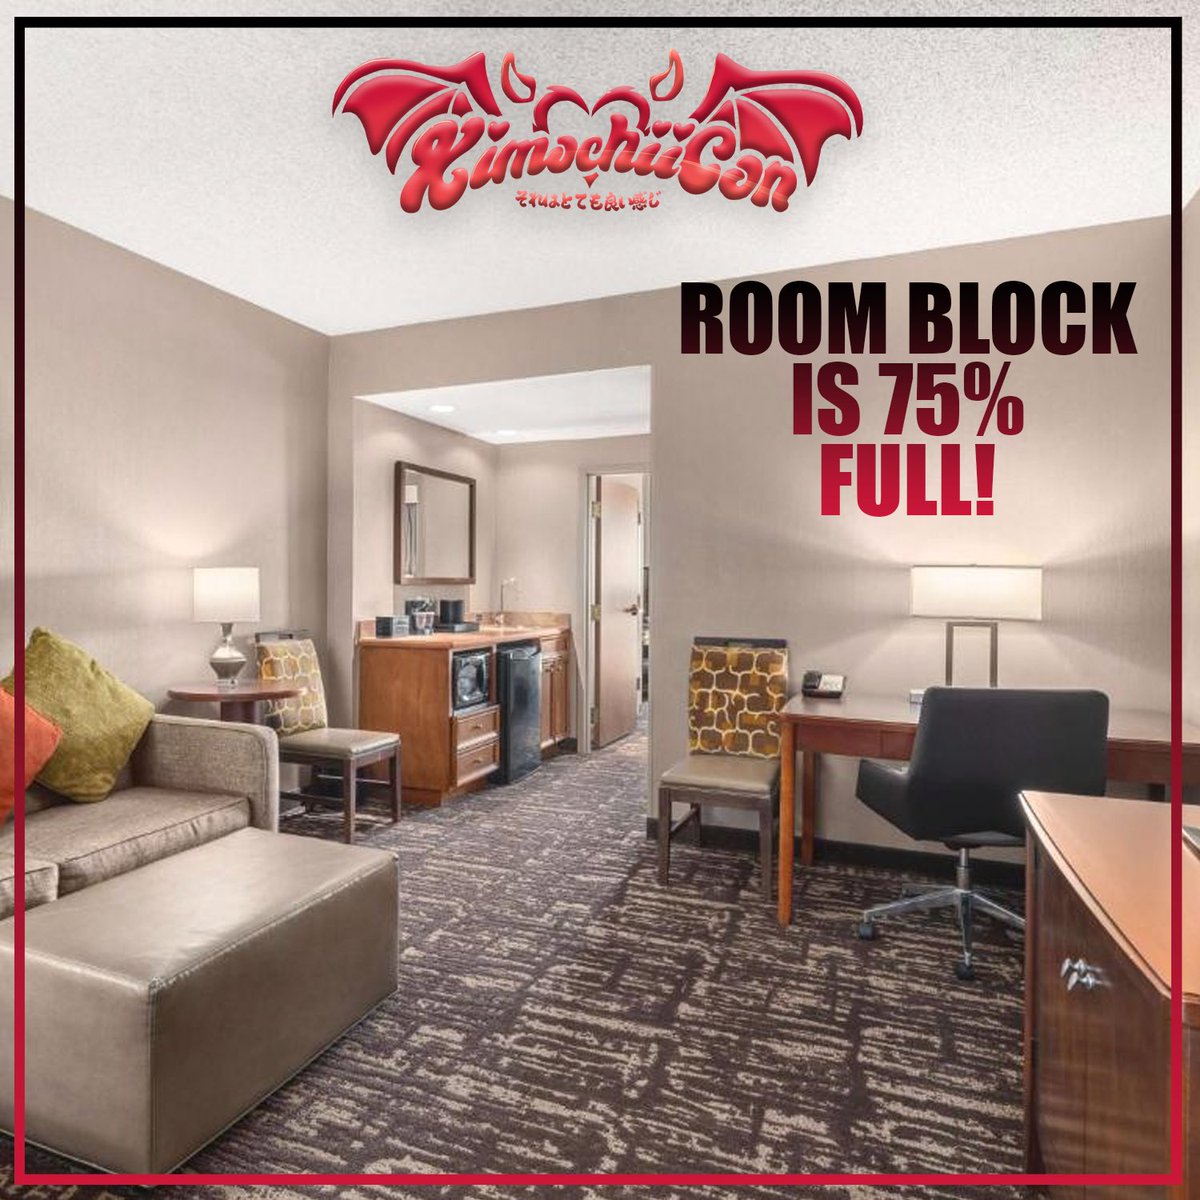 ❤️‍🔥 ROOM BLOCK UPDATE! ❤️‍🔥 Make sure to secure your room today!